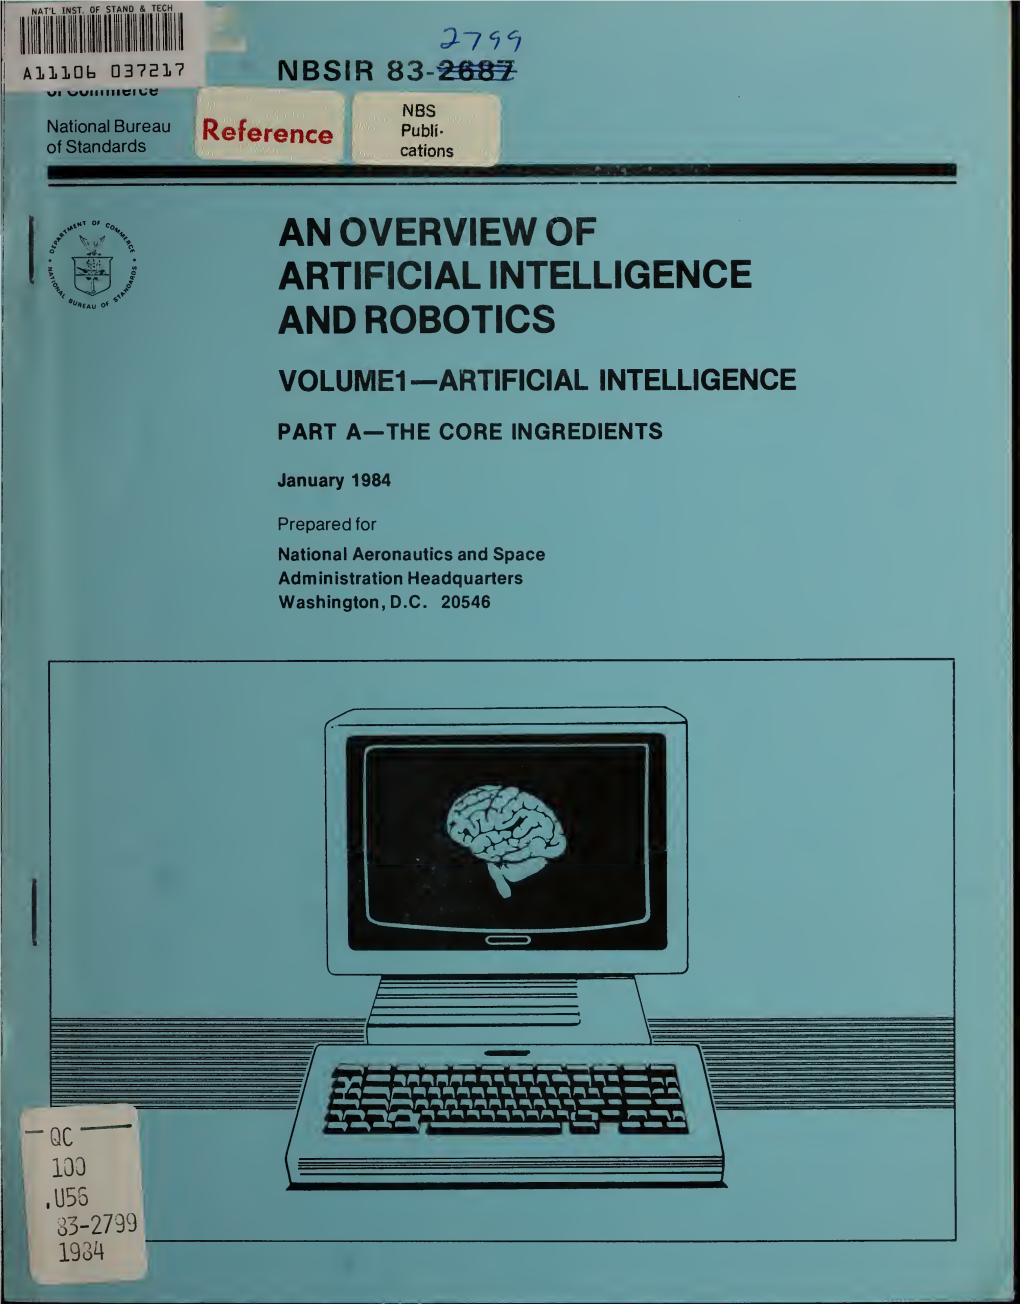 An Overview of Artificial Intelligence and Robotics